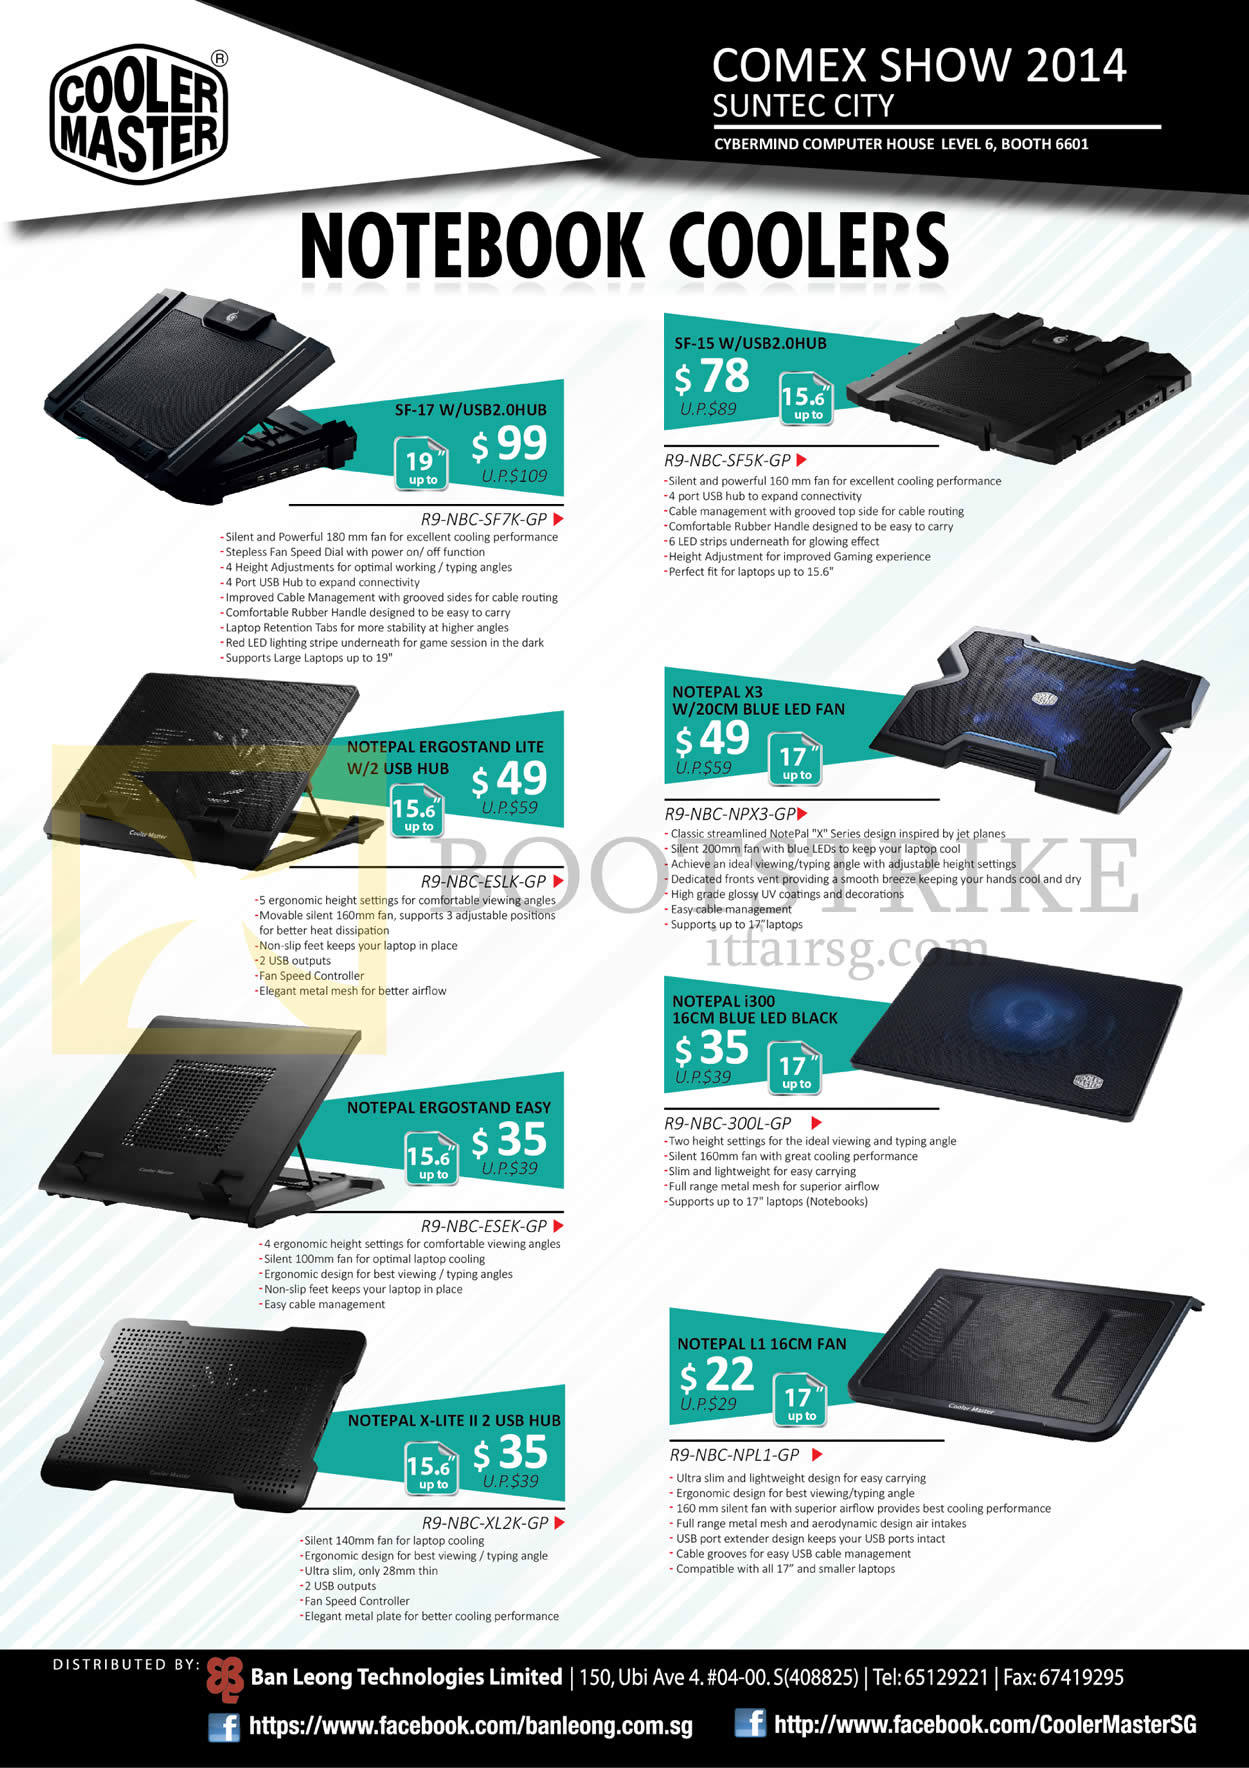 COMEX 2014 price list image brochure of Cybermind Cooler Master Notebook Coolers SF-17, SF-15, Notepal Ergostand Lite, Easy, Notepal X3, I300, L1, X-Lite II 2